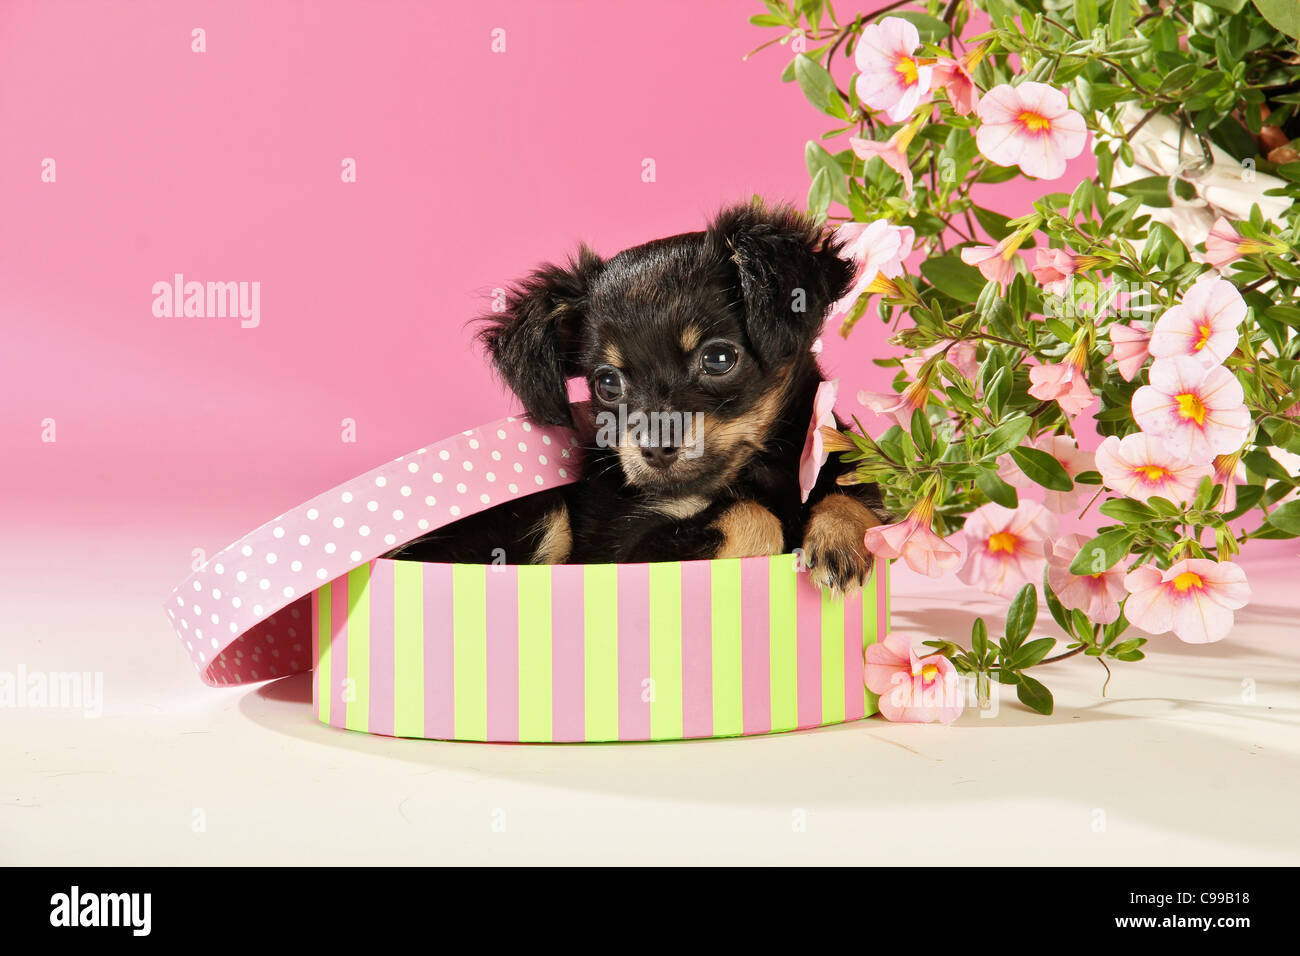 Russian Toy Terrier dog puppy box Stock Photo